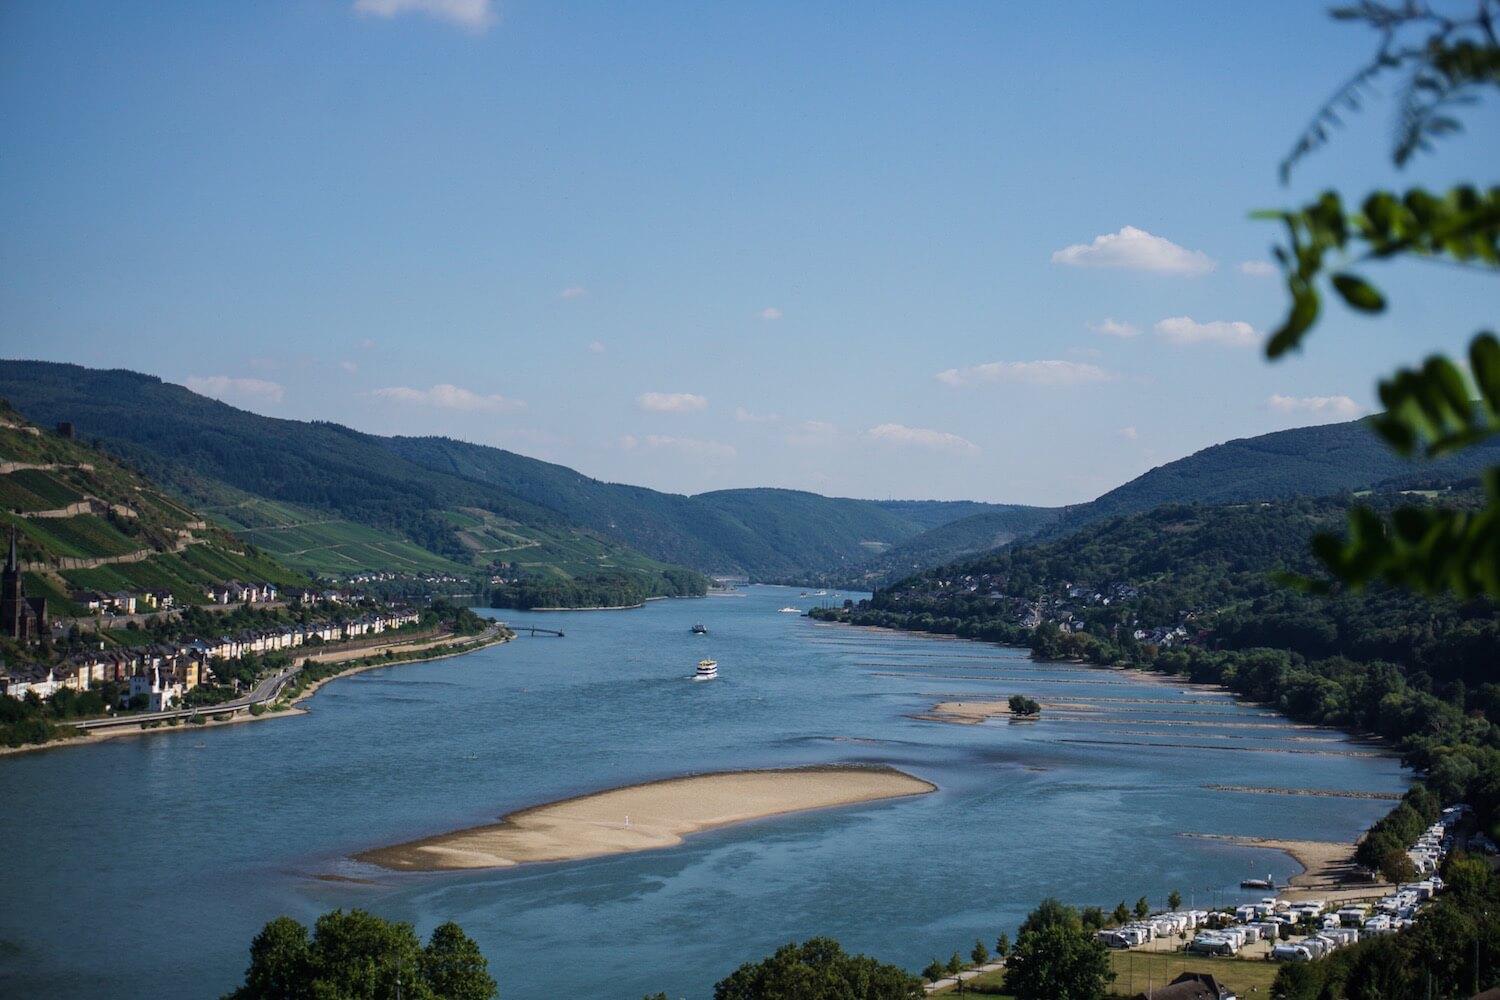 Welcome to Germany: the Rhine river